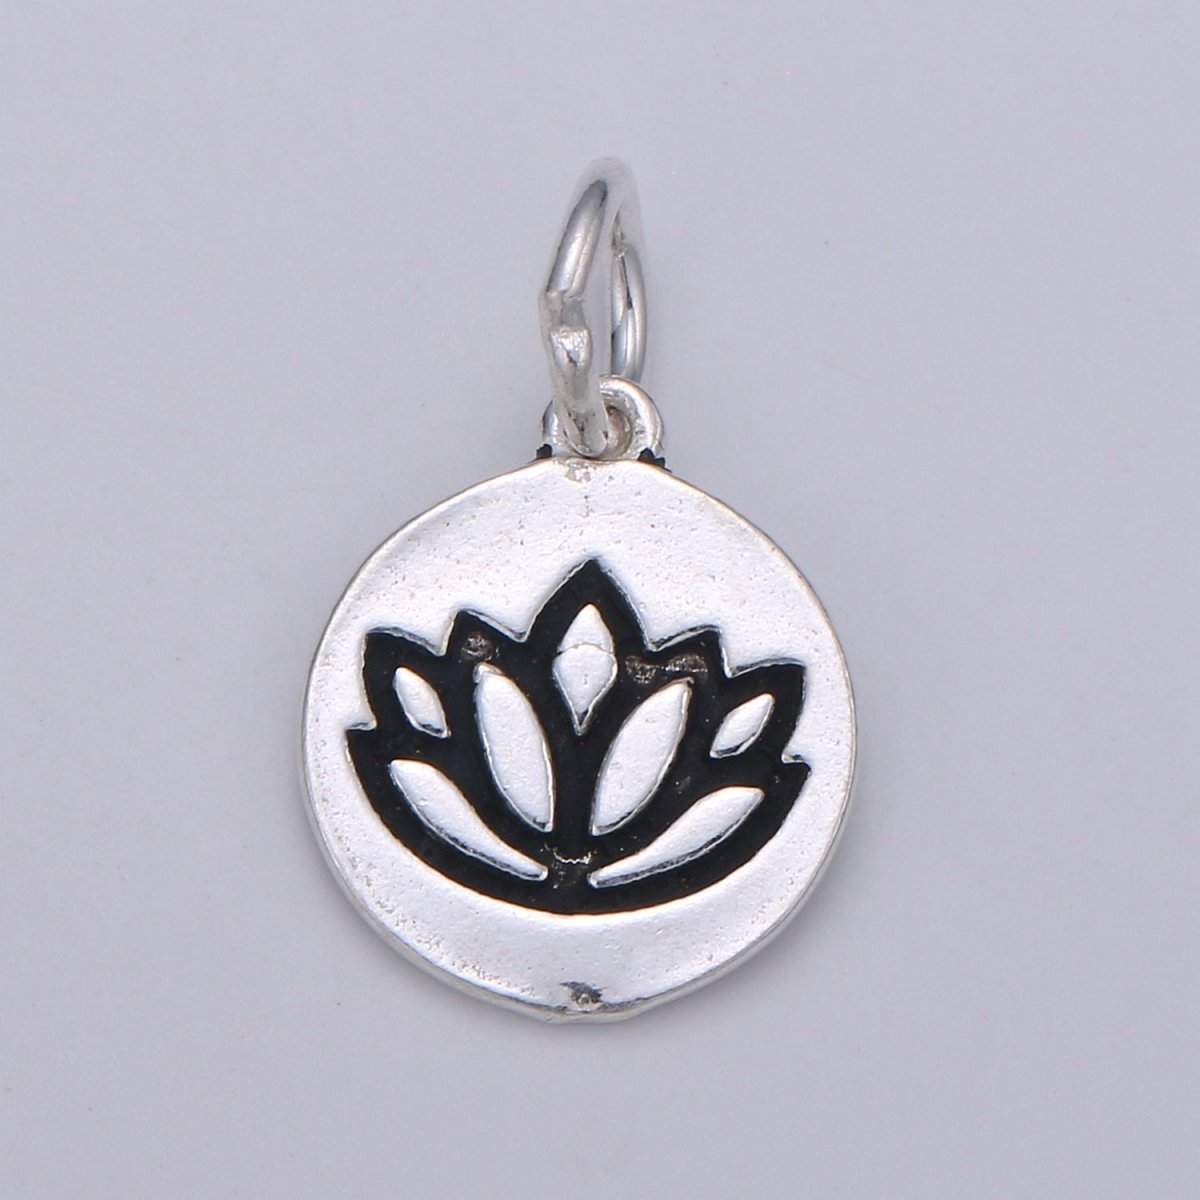 925 Sterling Silver Lotus Flower Charm, Floral Charm Silver Flower Charm for Necklace Bracelet Earring, Lotus Charm SL-097 - DLUXCA